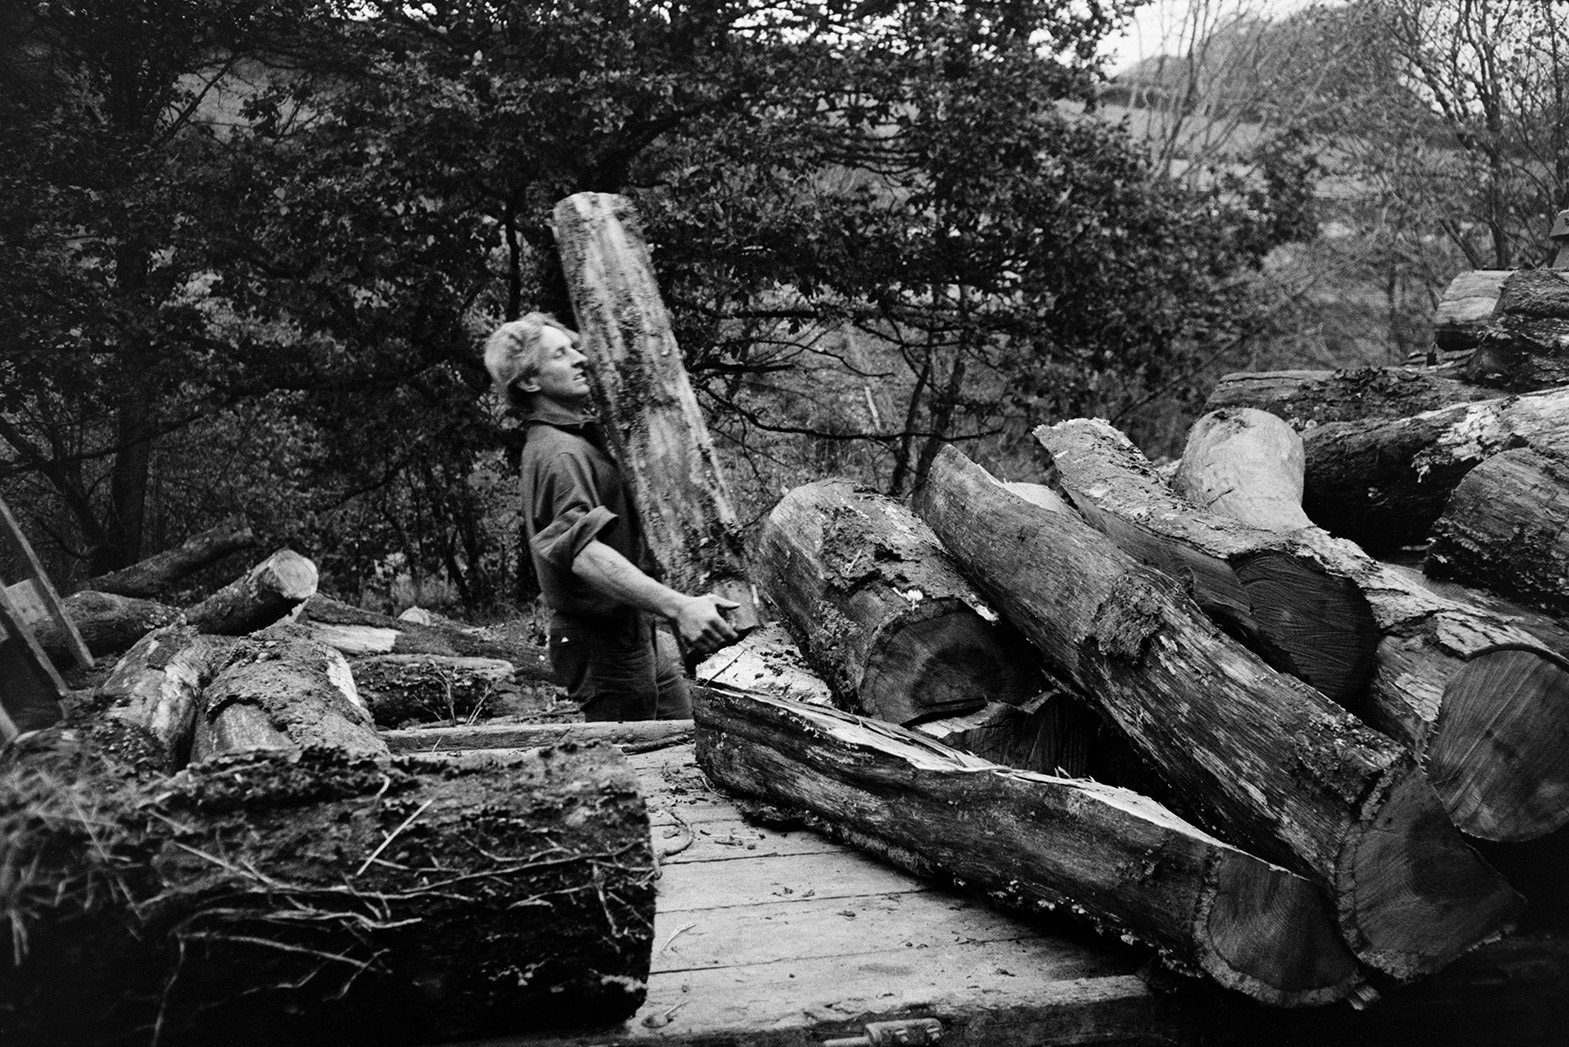 Ivor Bourne either loading or unloading logs onto a trailer near Kiverley, Beaford.